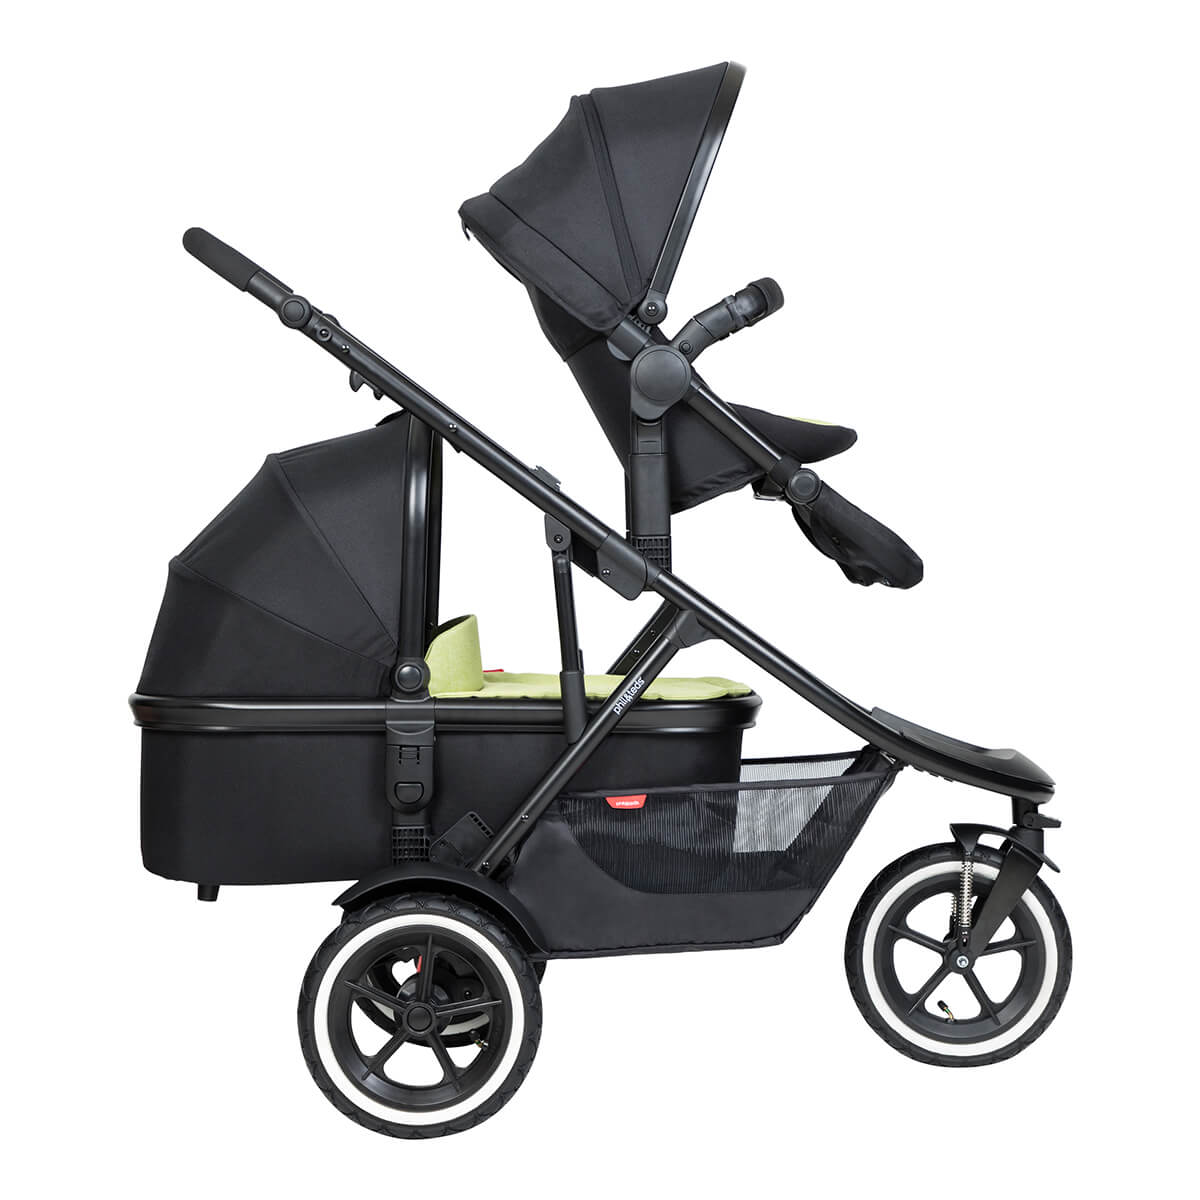 https://cdn.accentuate.io/7344766746808/19440099688632/philteds-sport-buggy-with-double-kit-extended-clip-and-snug-carrycot-side-view-v1700697749515.jpg?1200x1200